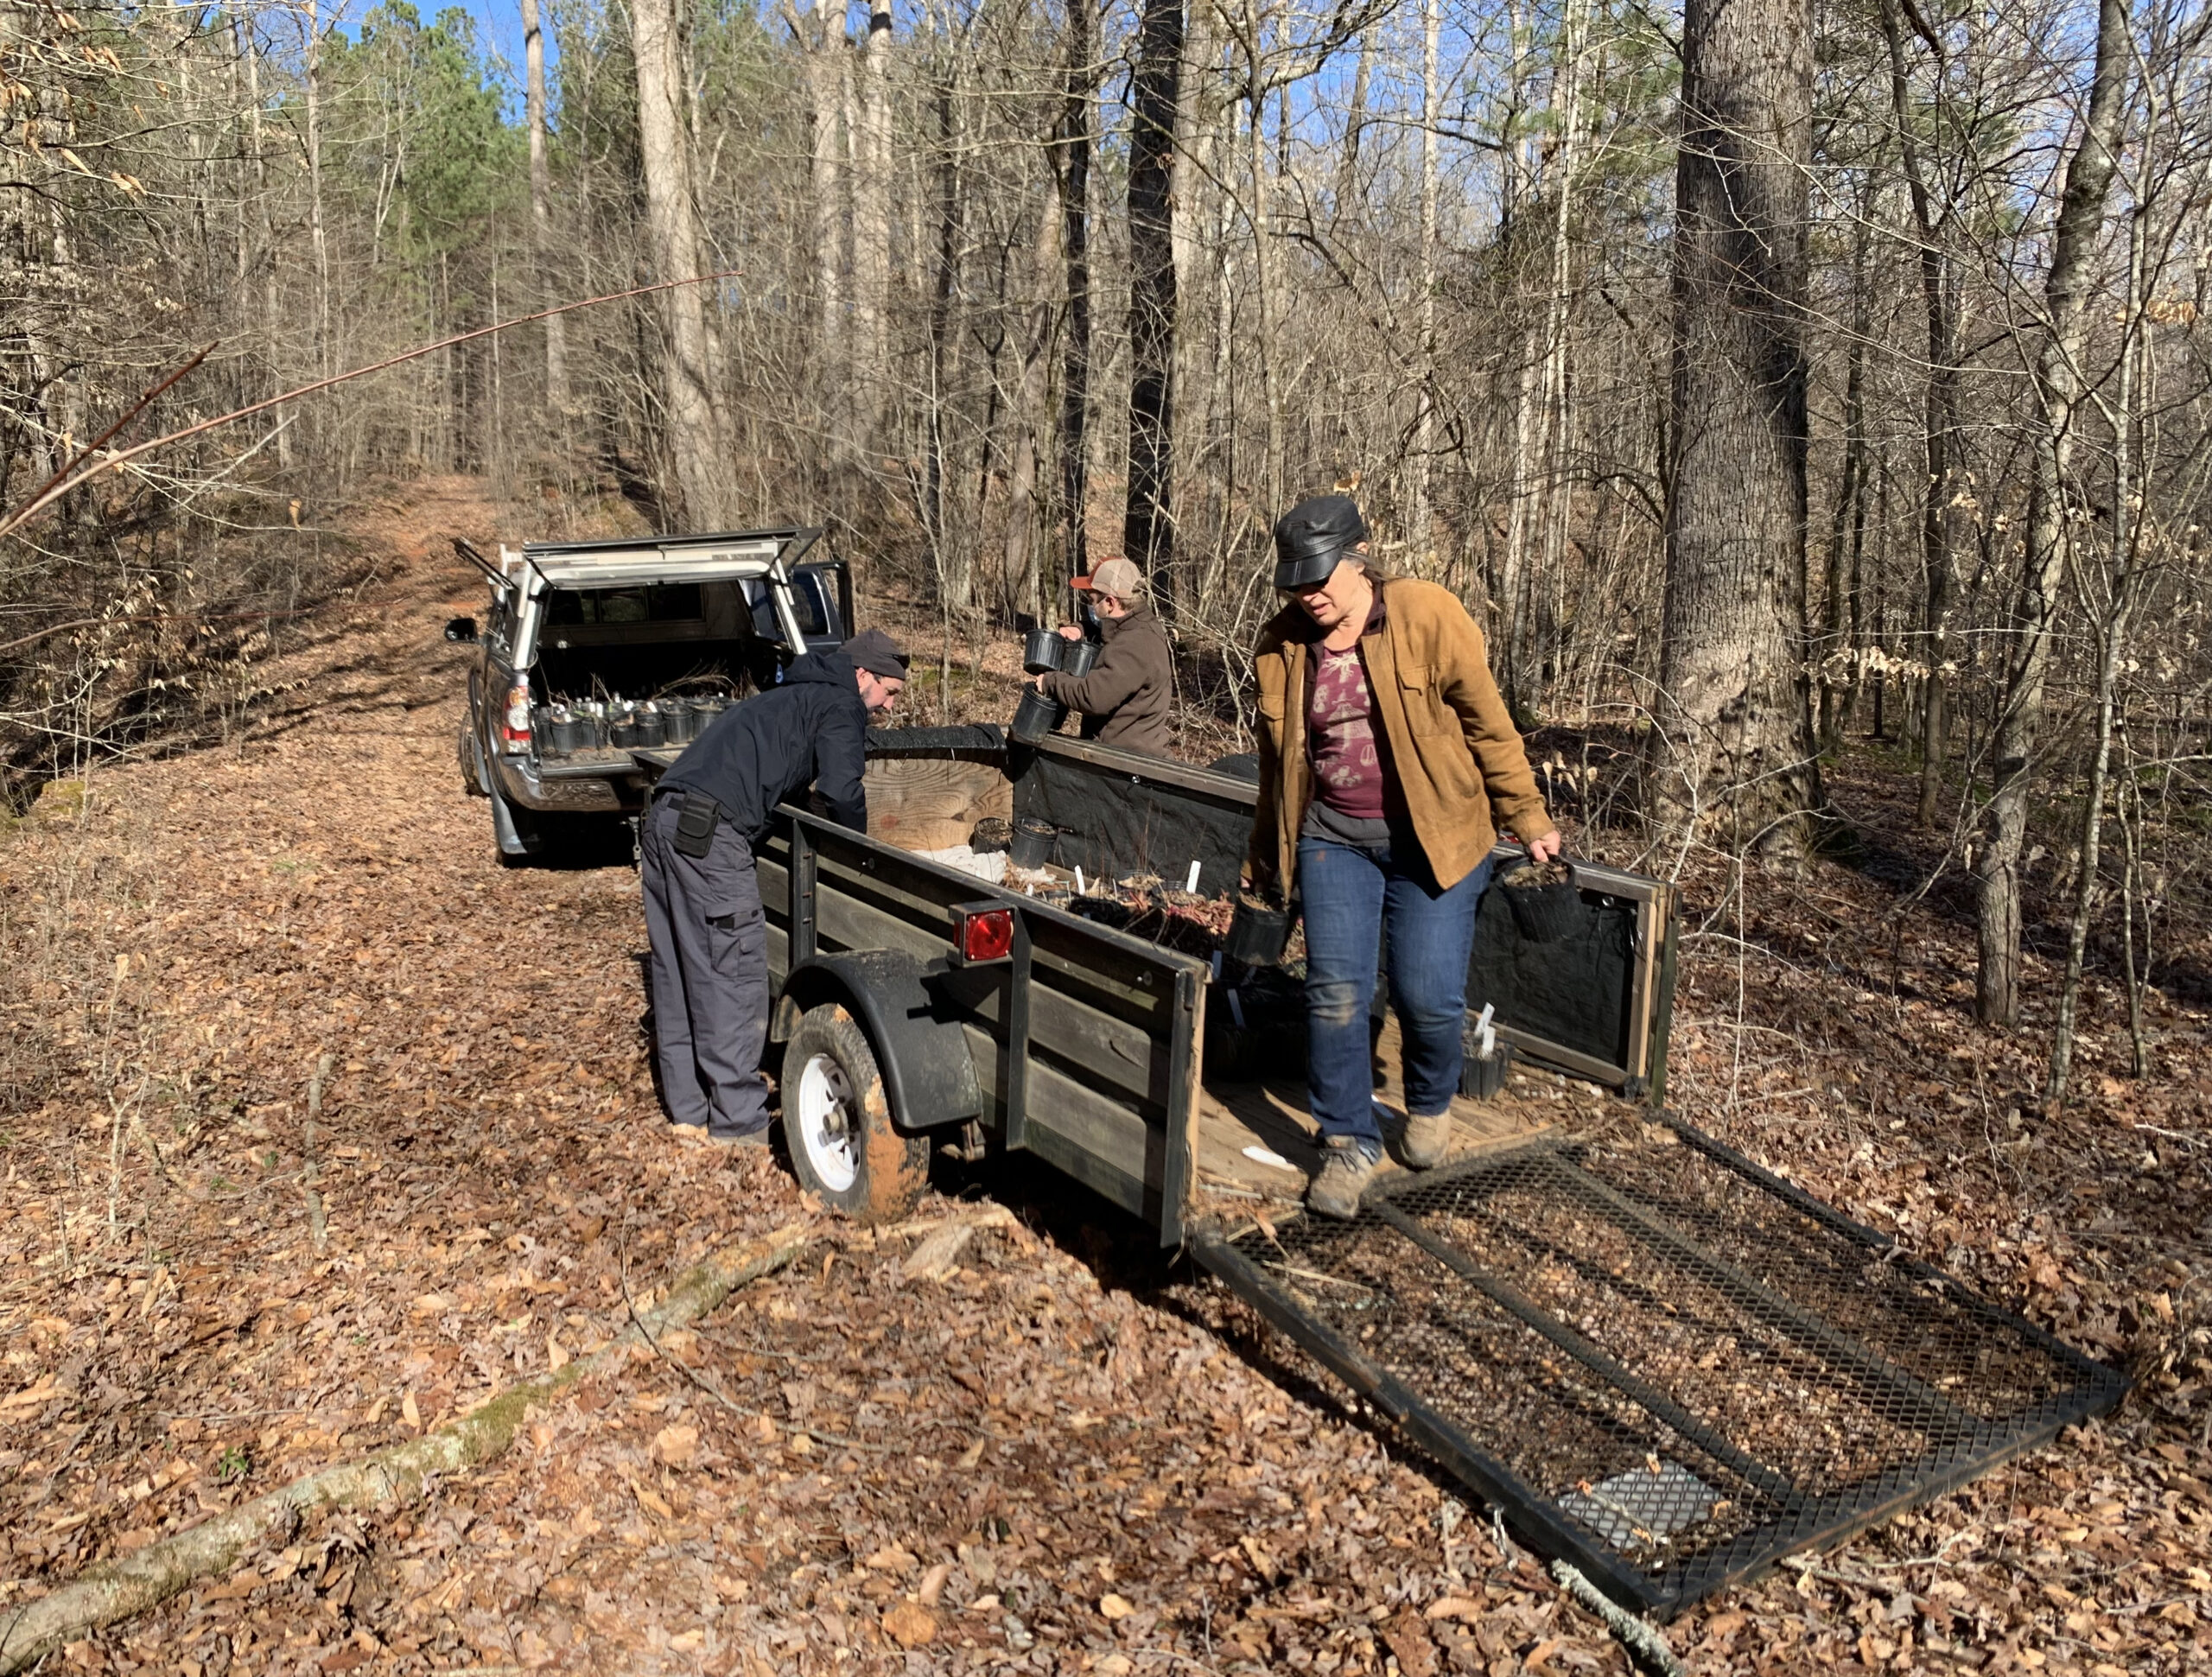 Unloading the trailer to get uphill to the prairie